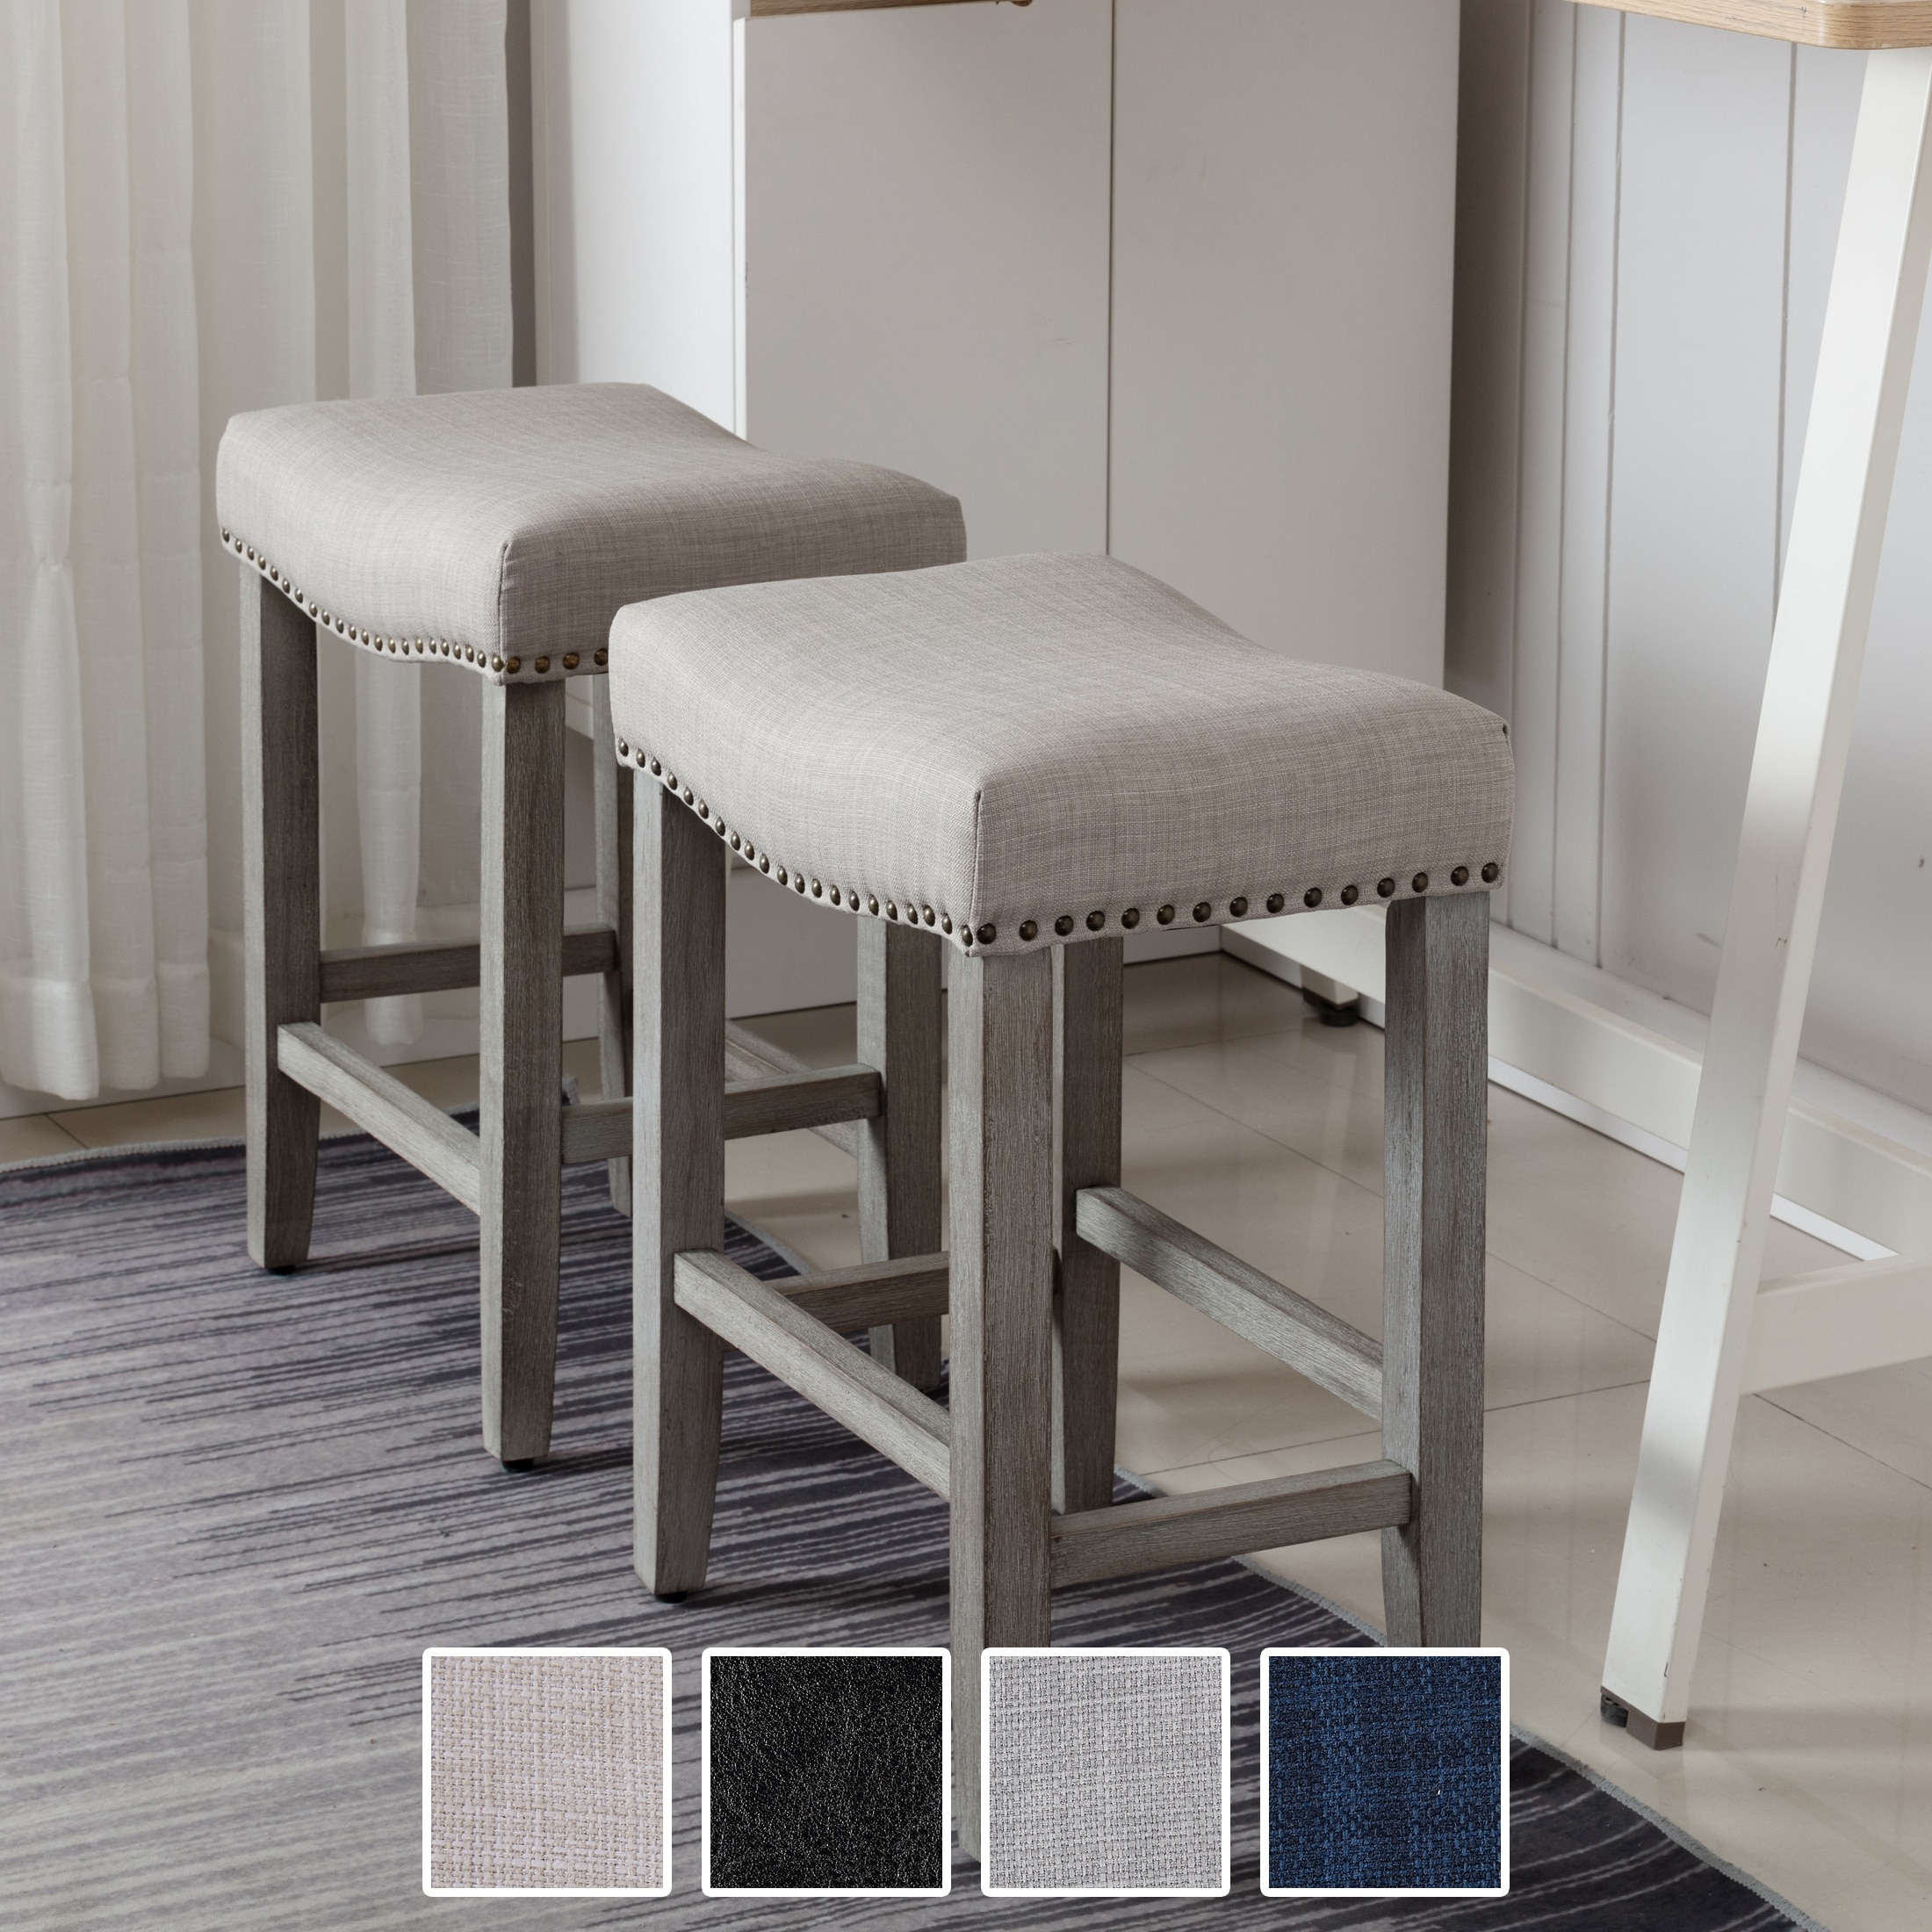 Booth Uitgraving haakje Carter 24" Upholstered Backless Counter Stool (Set of 2) - On Sale -  Overstock - 32986672